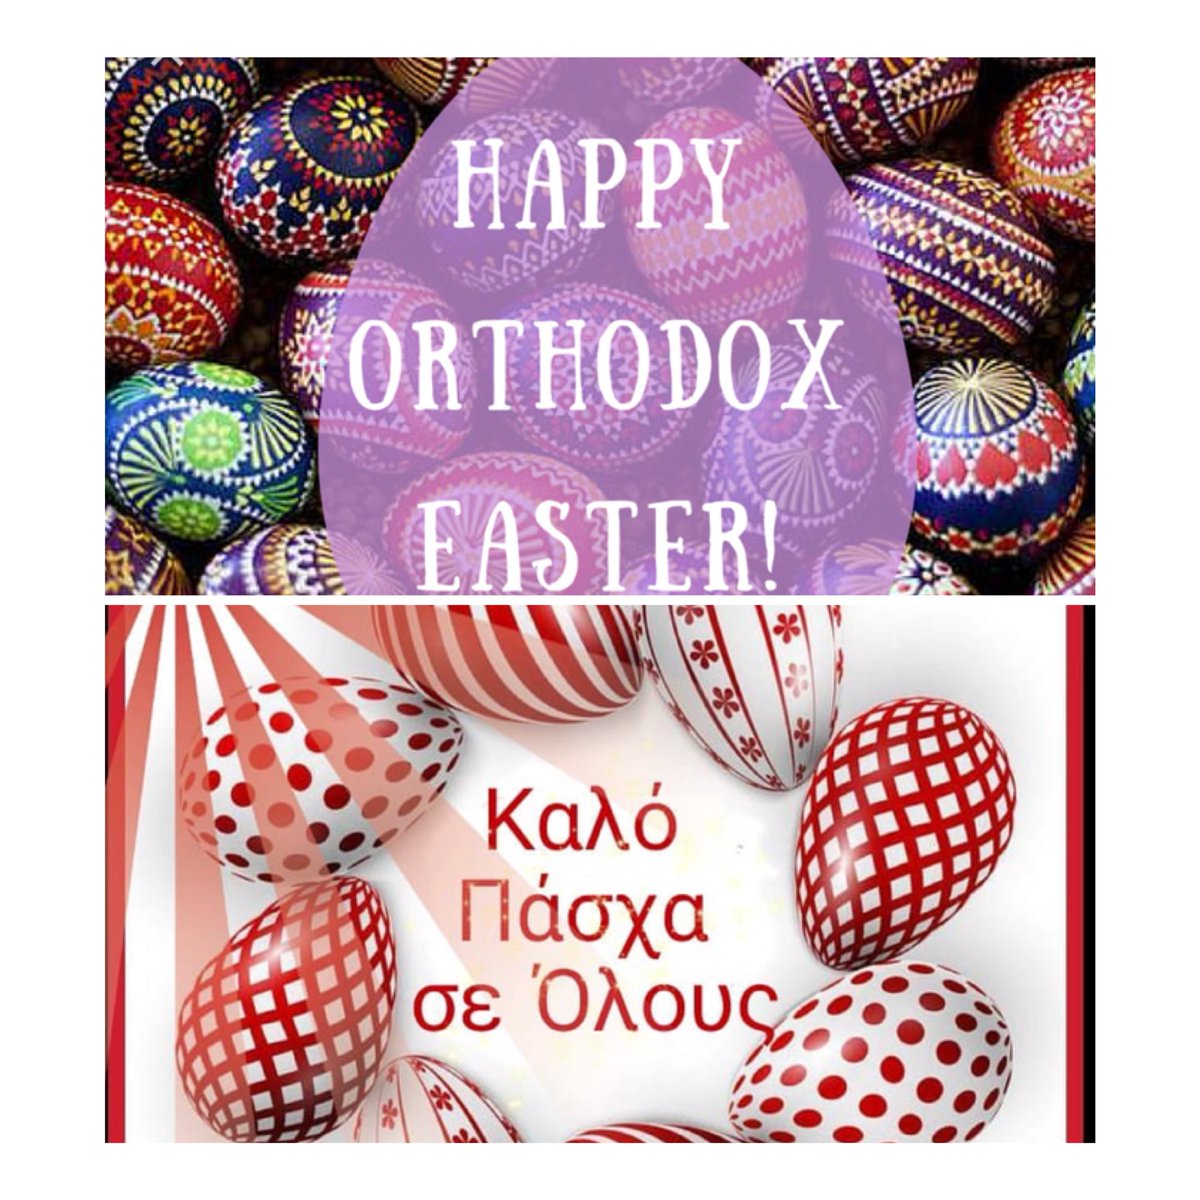 Nadia Meyers On Twitter Happy Greek Orthodox Easter Wishing You And Your Family All The Joy And Wonder This Day Brings Https T Co 1qmemueqsp Twitter